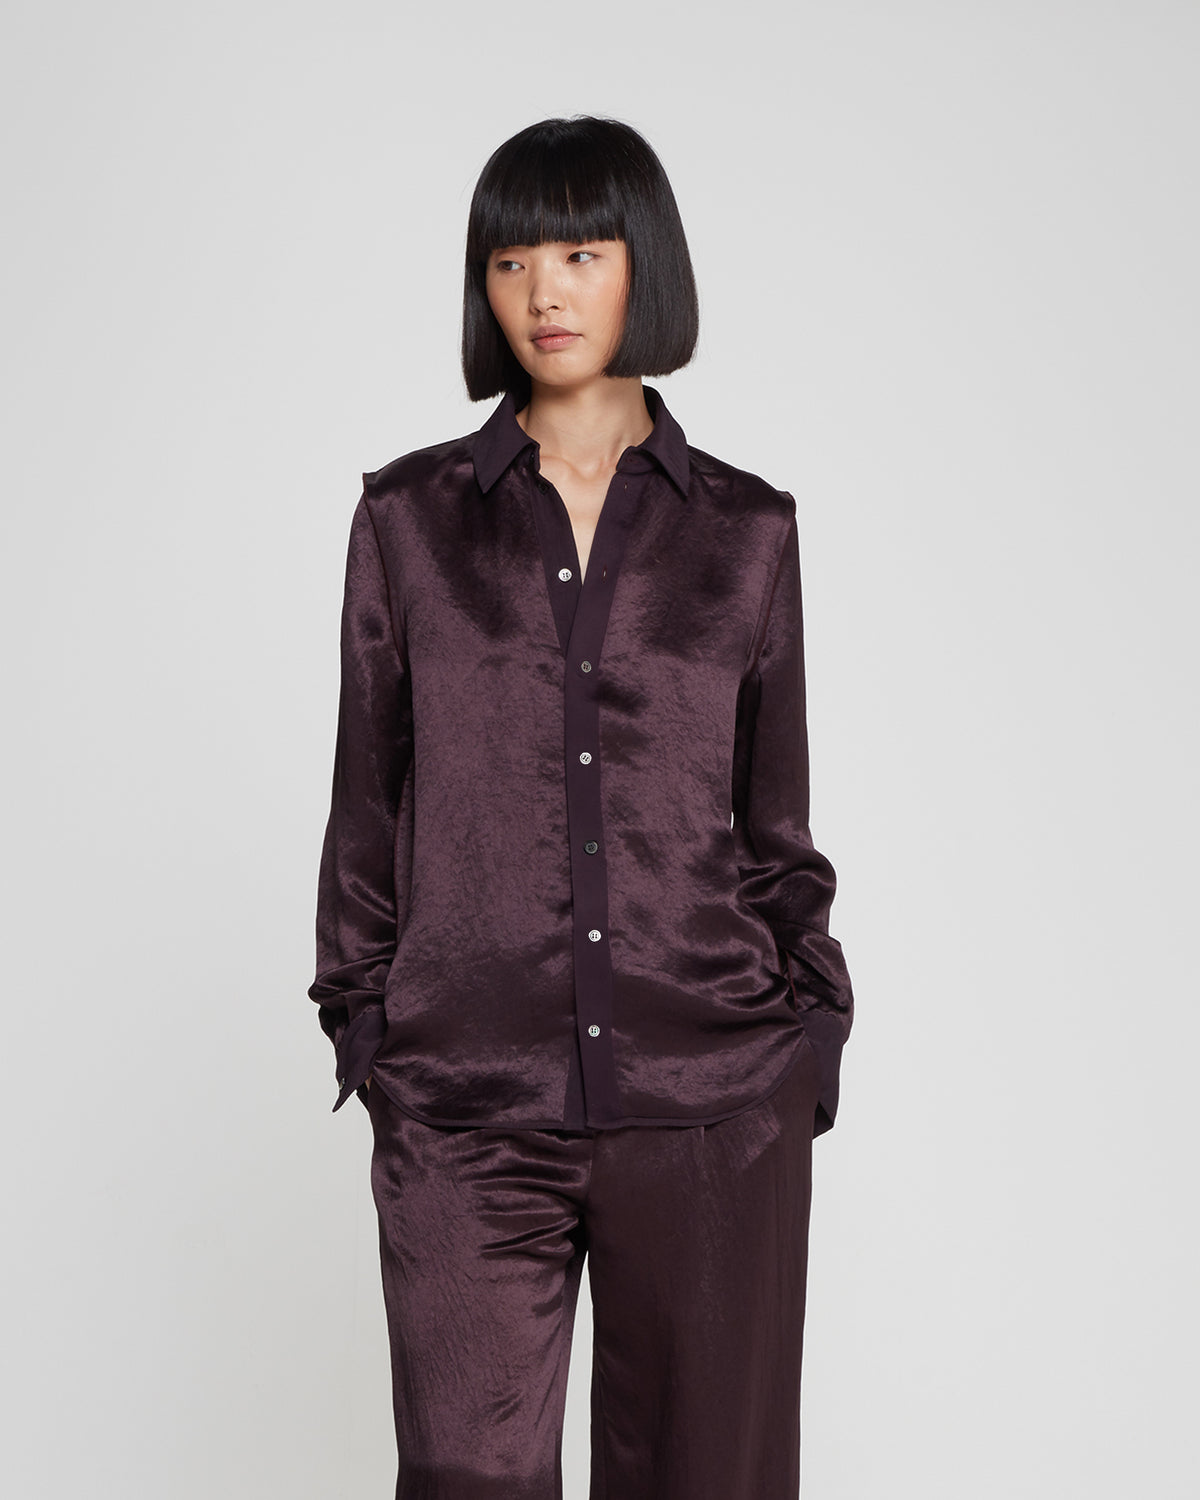 Satin Inside Out Shirt - Maroon